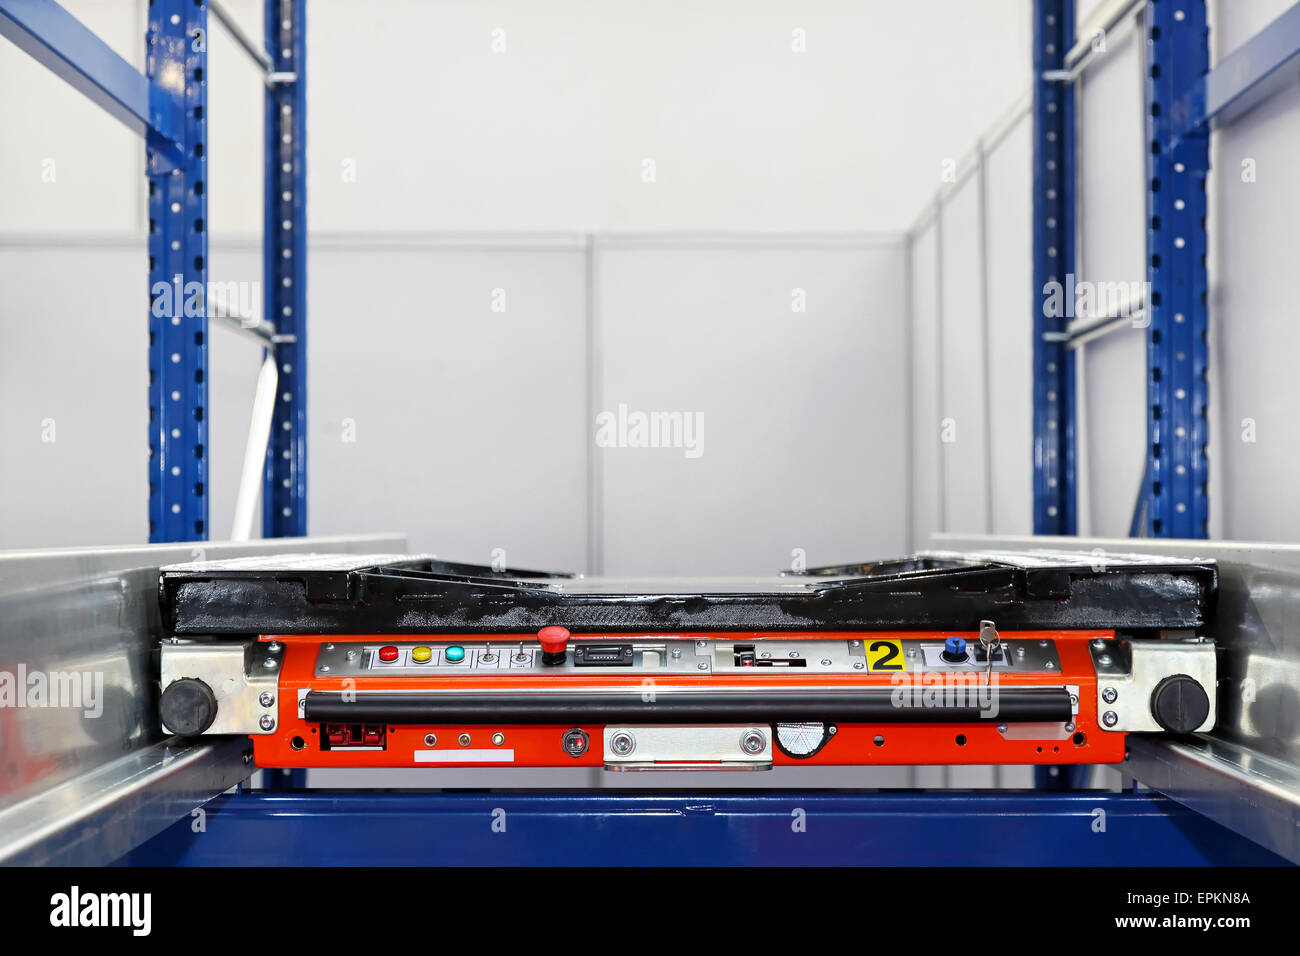 Automated pallet transport Stock Photo